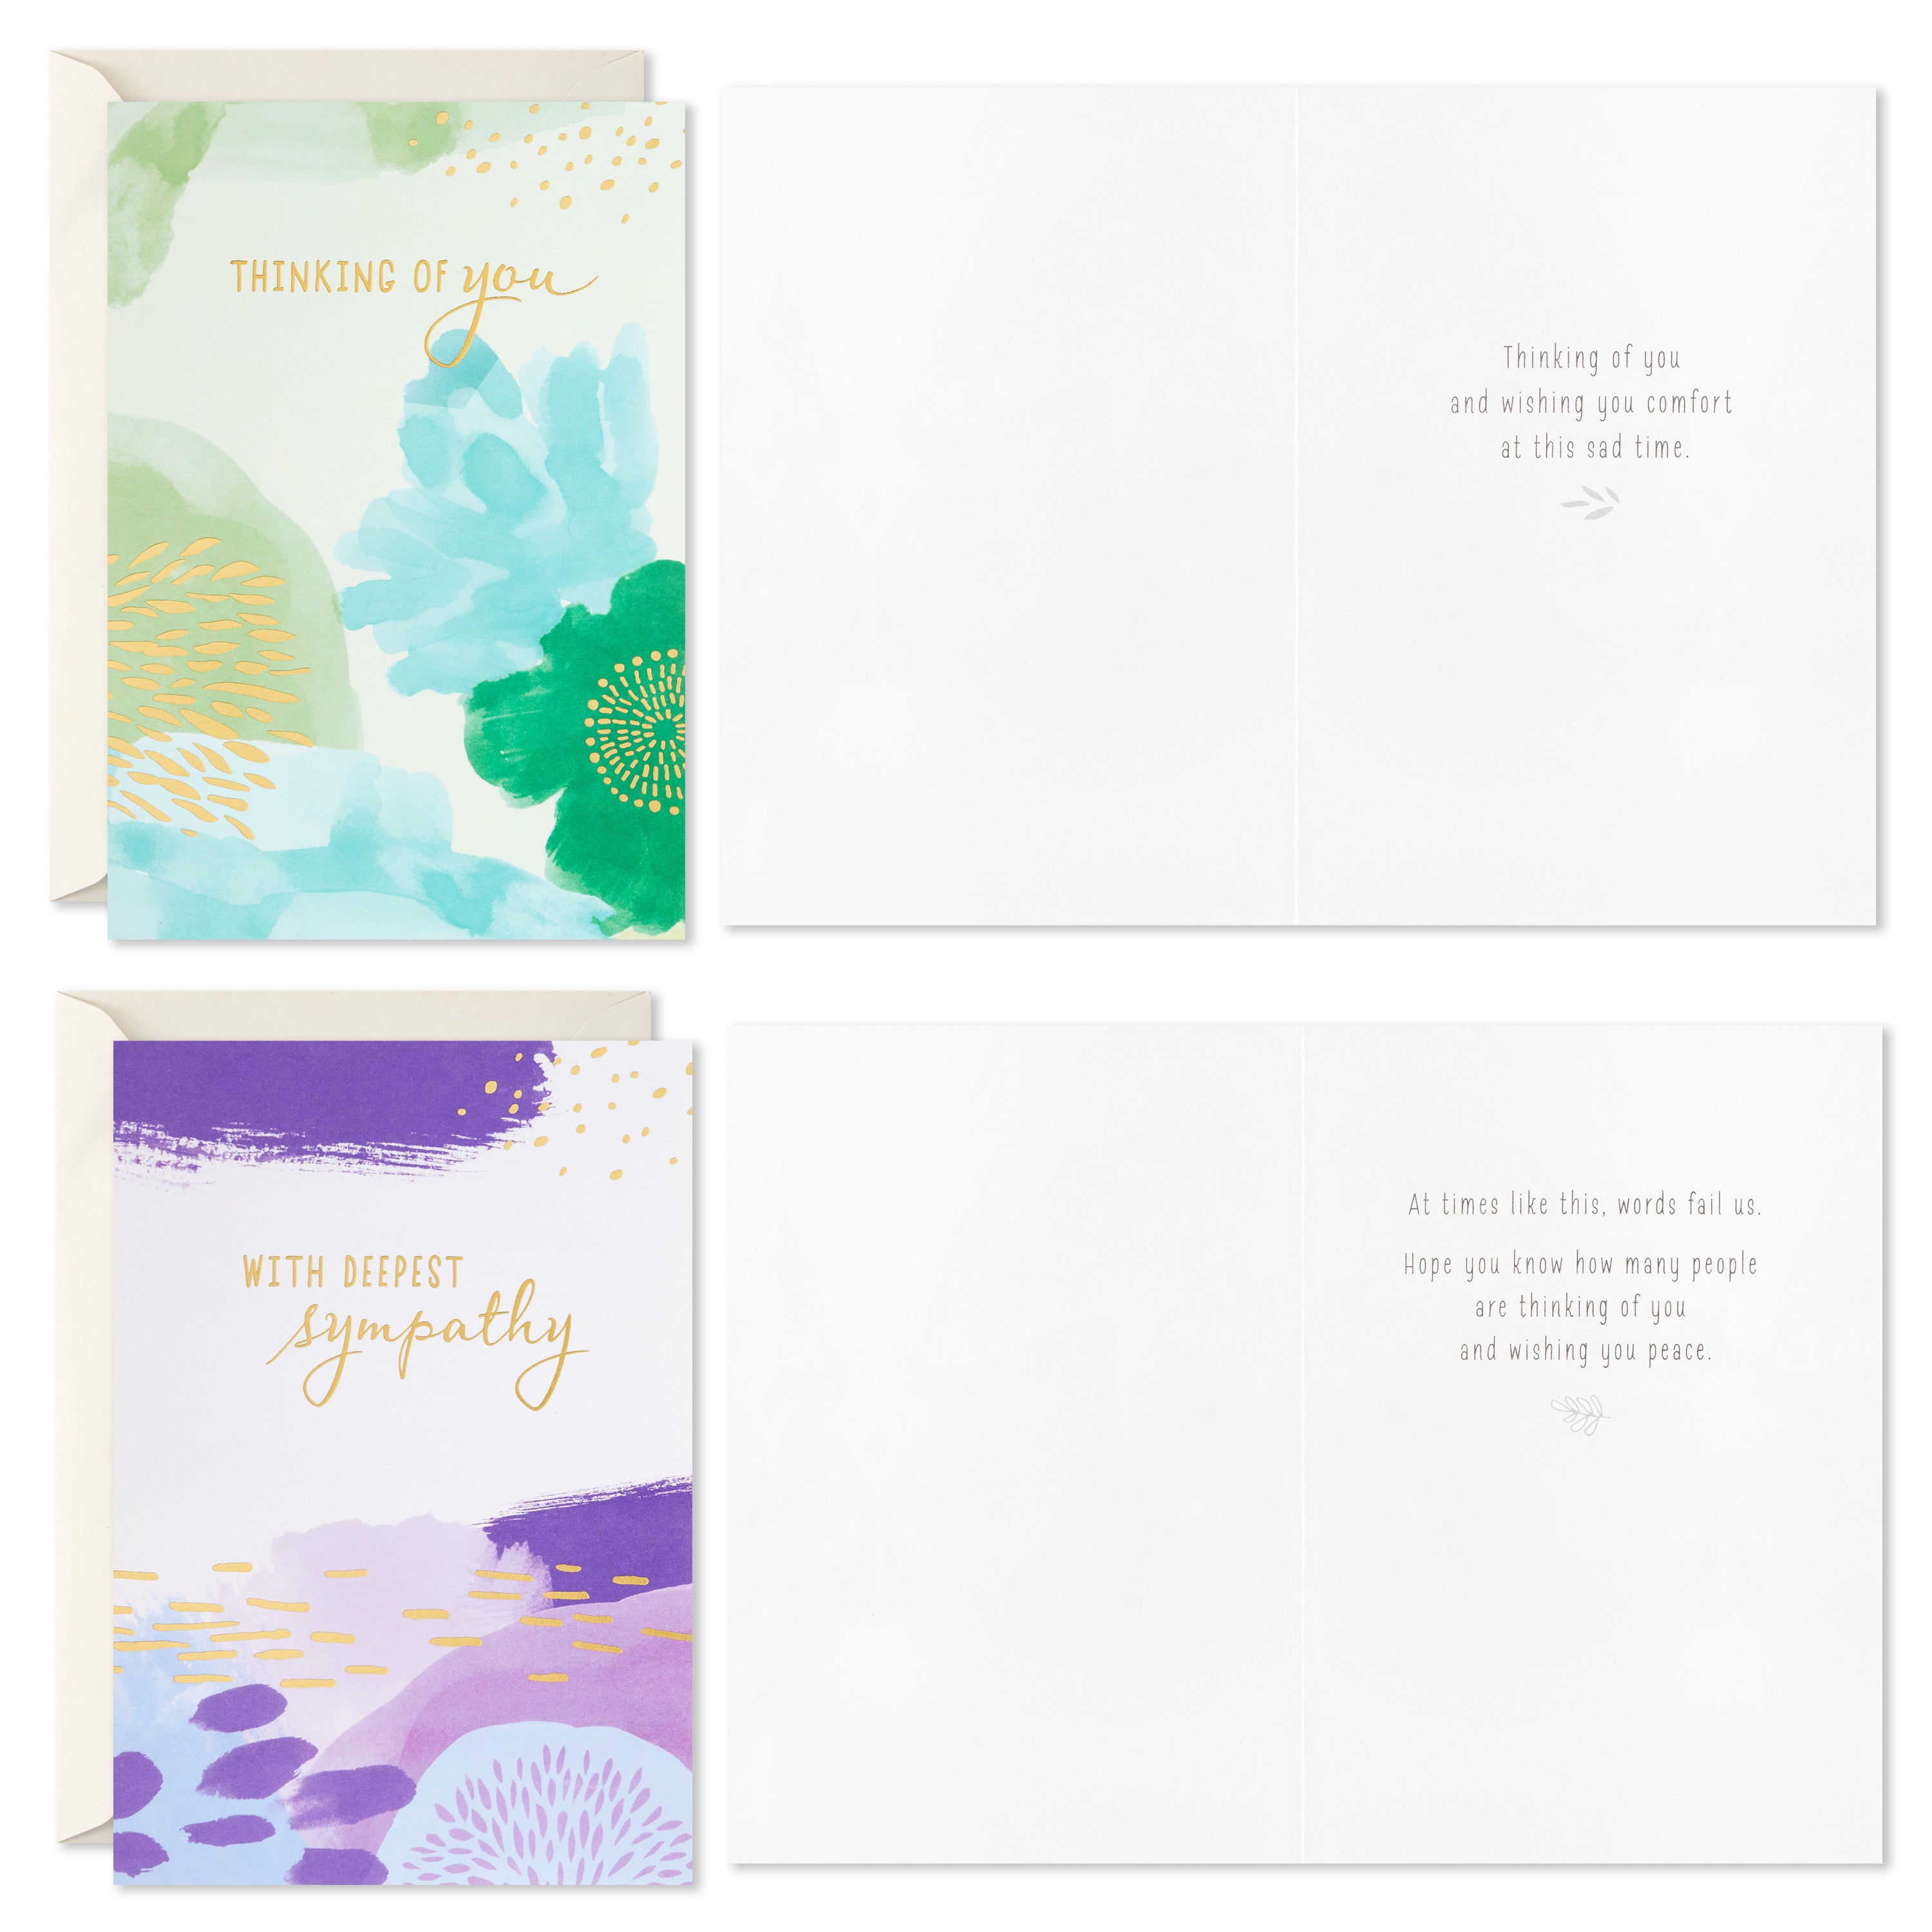 Sympathy Cards Assortment, Abstract Watercolor (16 Assorted Thinking of You Cards with Envelopes)